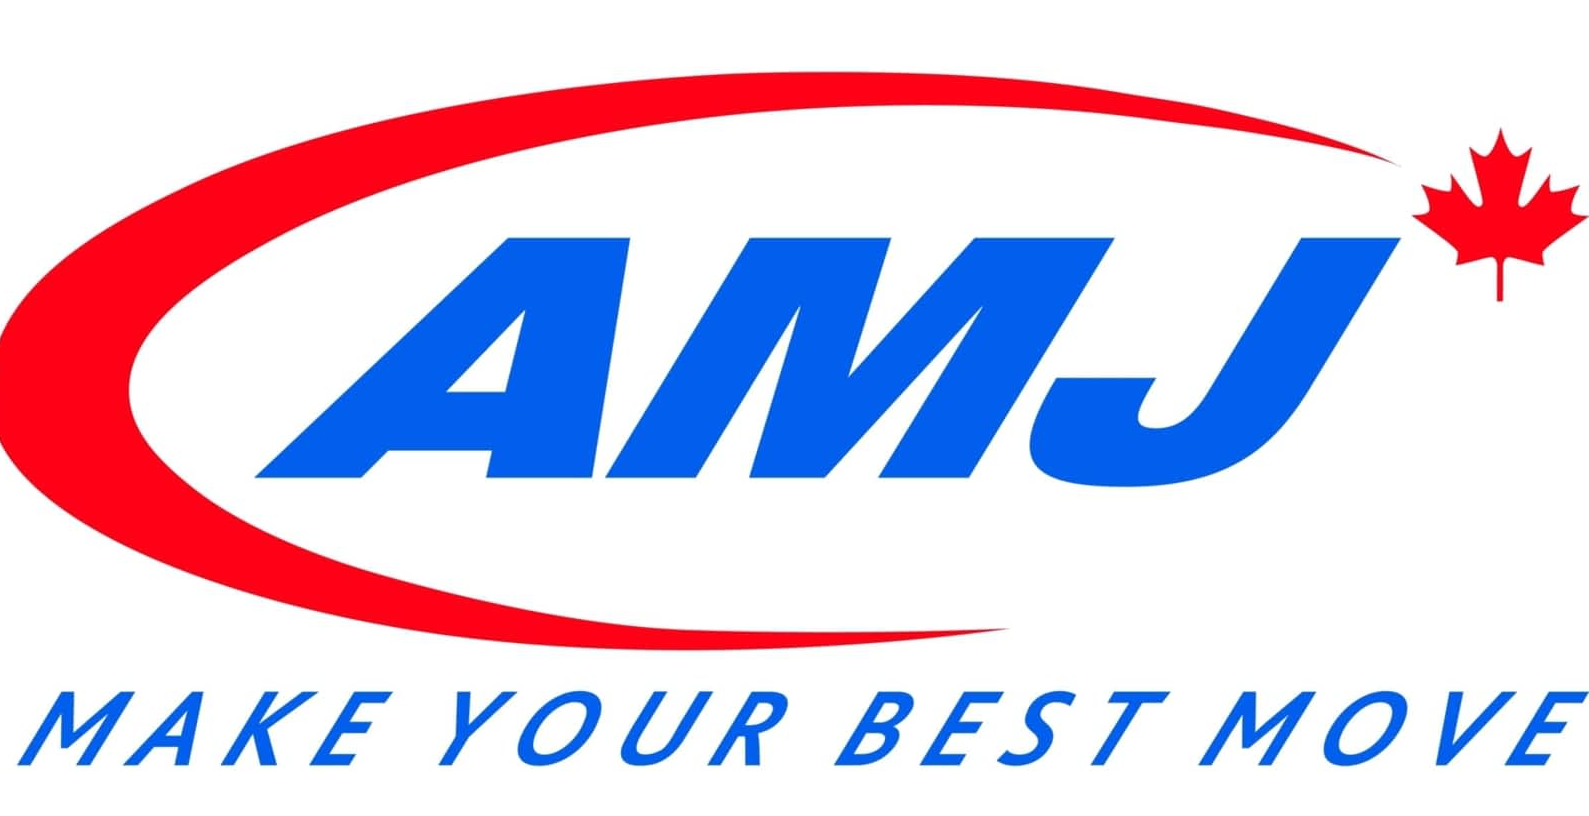 the logo for amj says make your best move